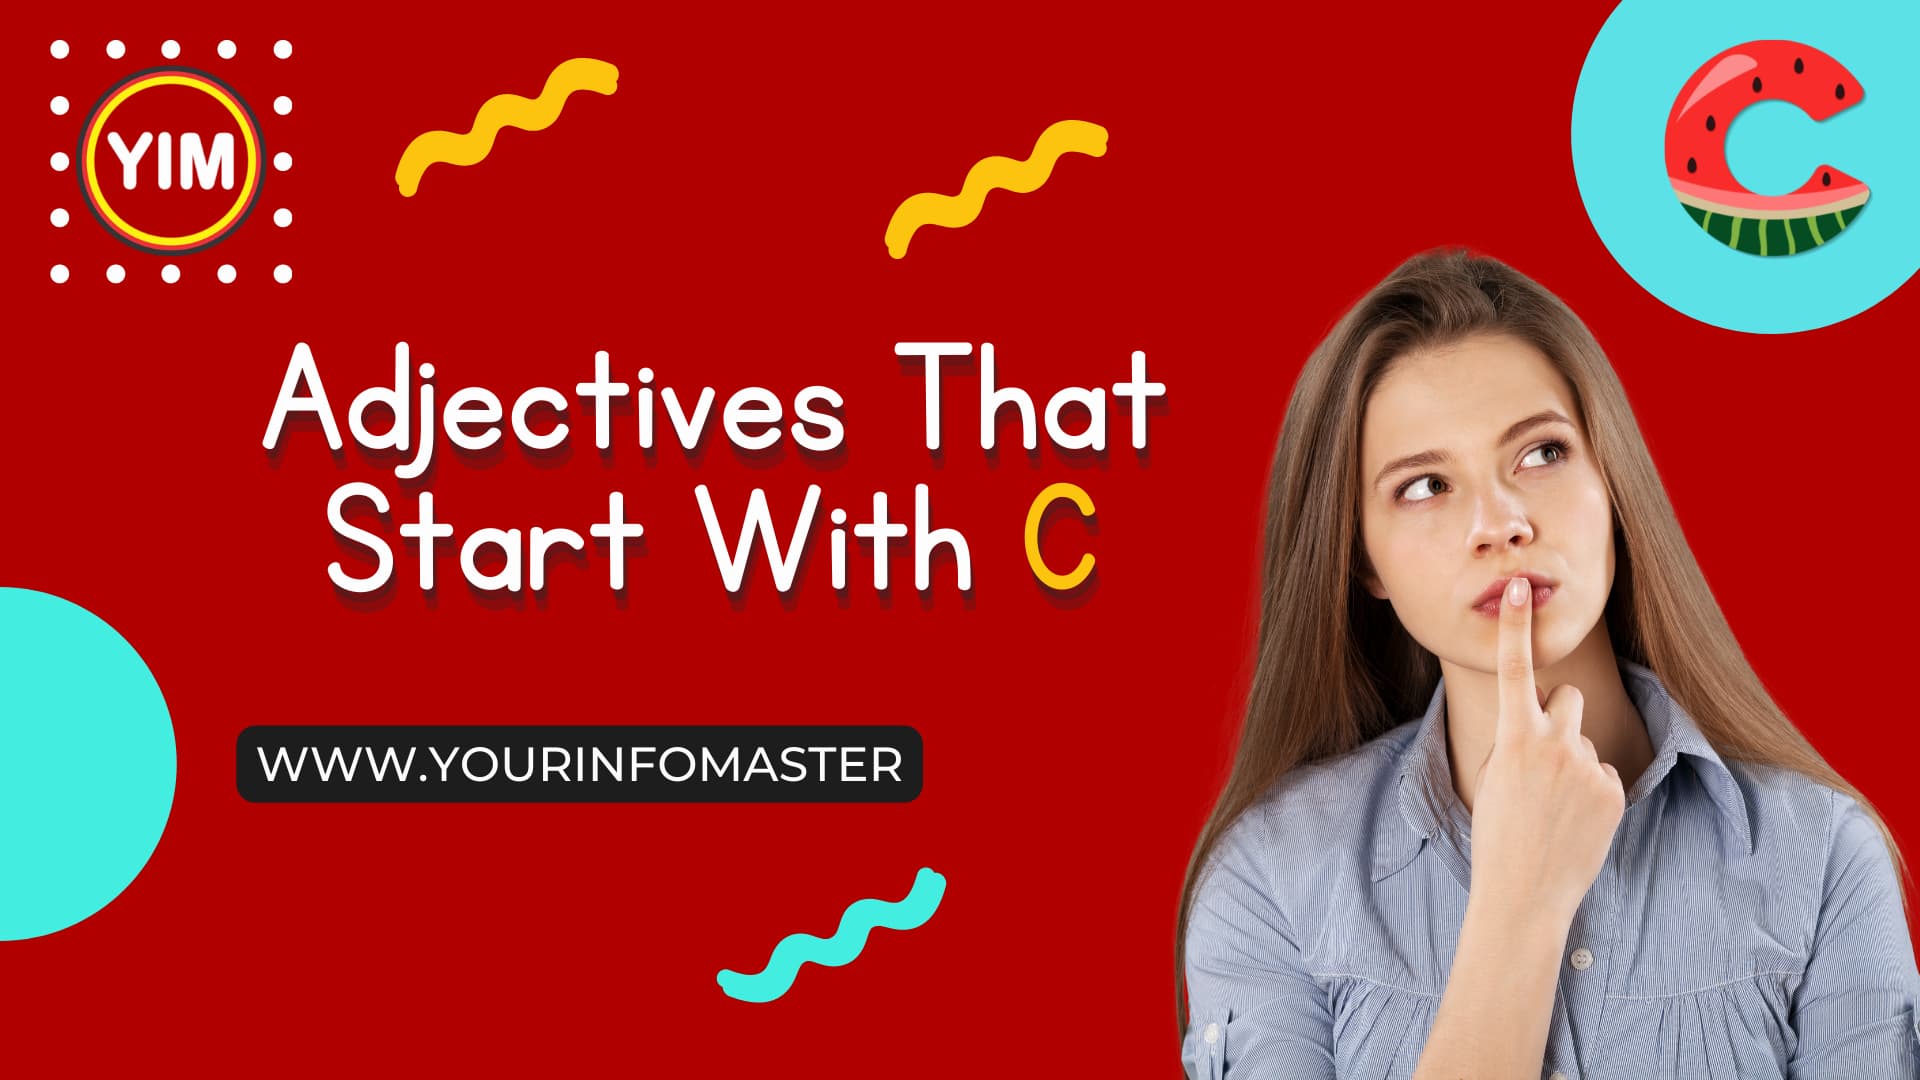 Adjectives, Adjectives That Start With C, c words, describing words that start with c, English, English Adjectives, English Grammar, English Vocabulary, Vocabulary, Words That Start with c